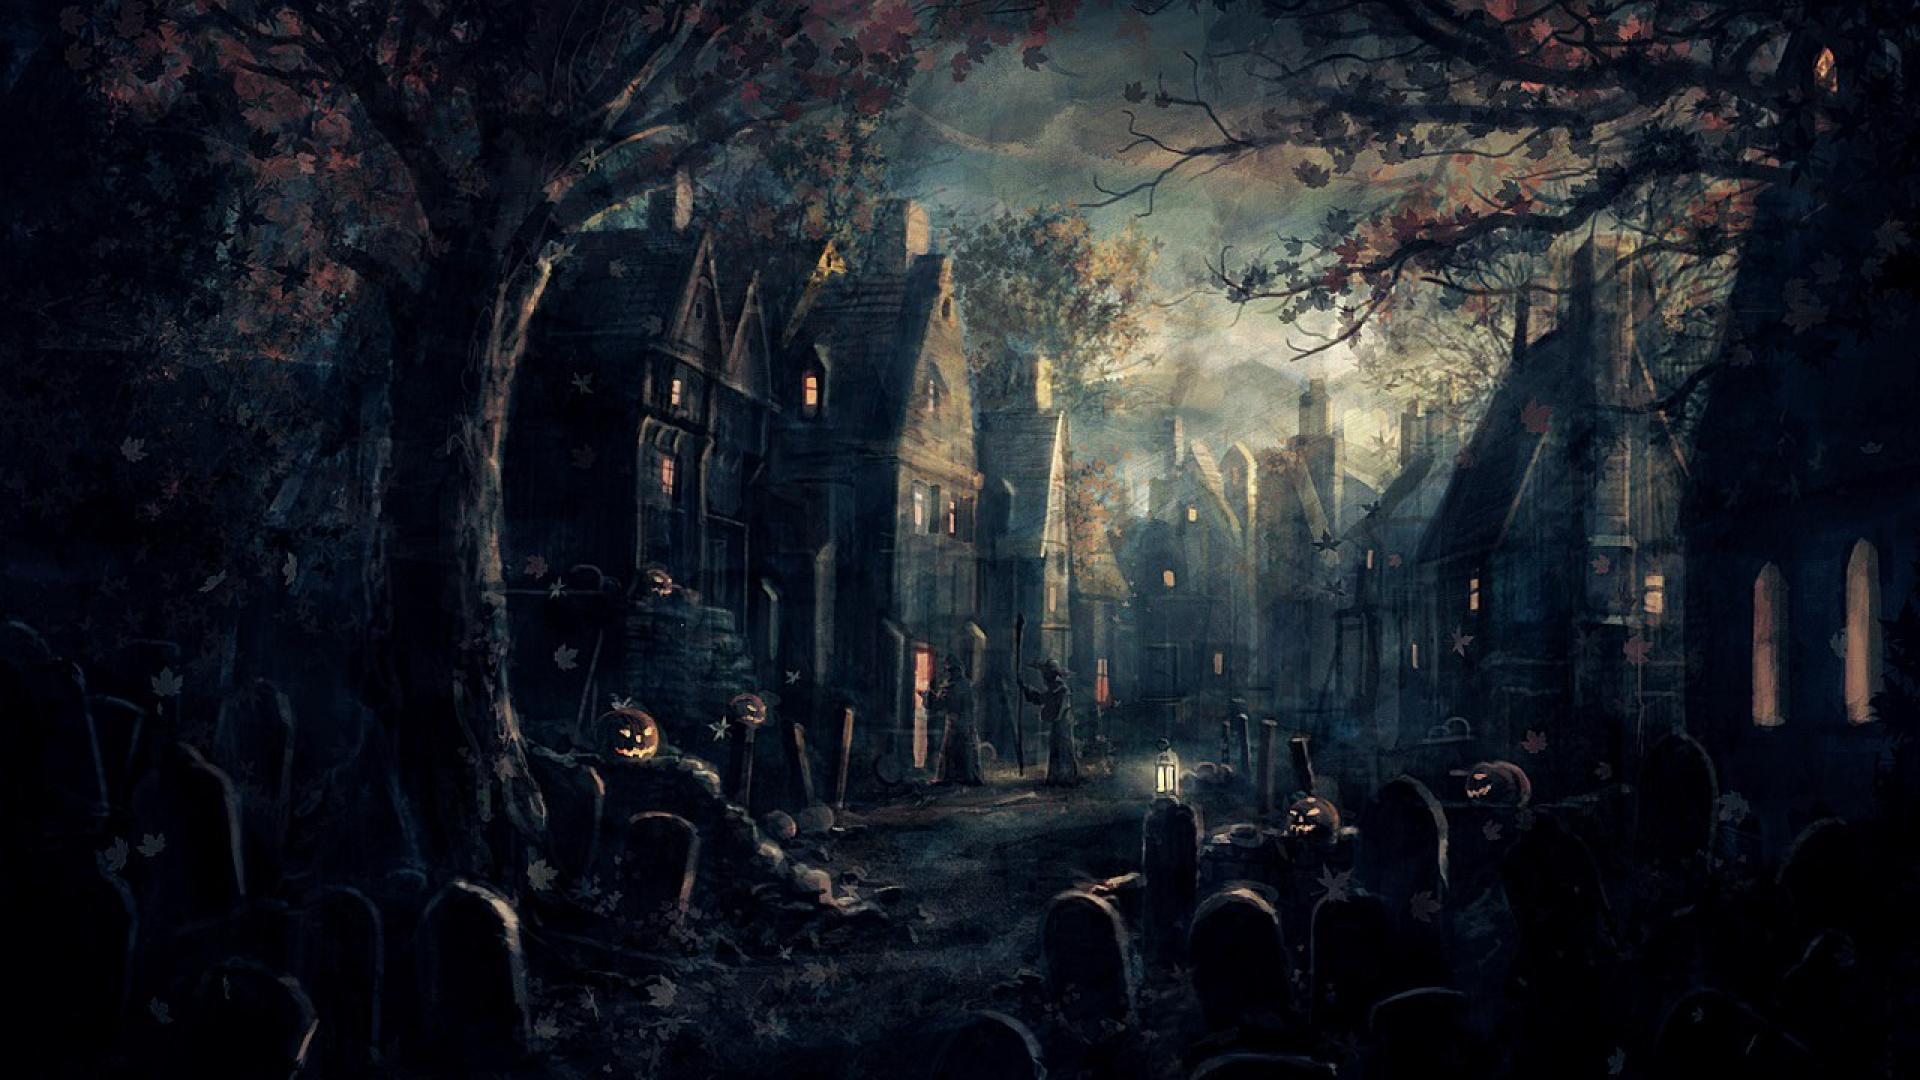 Halloween Background & Wallpaper Collection 2014